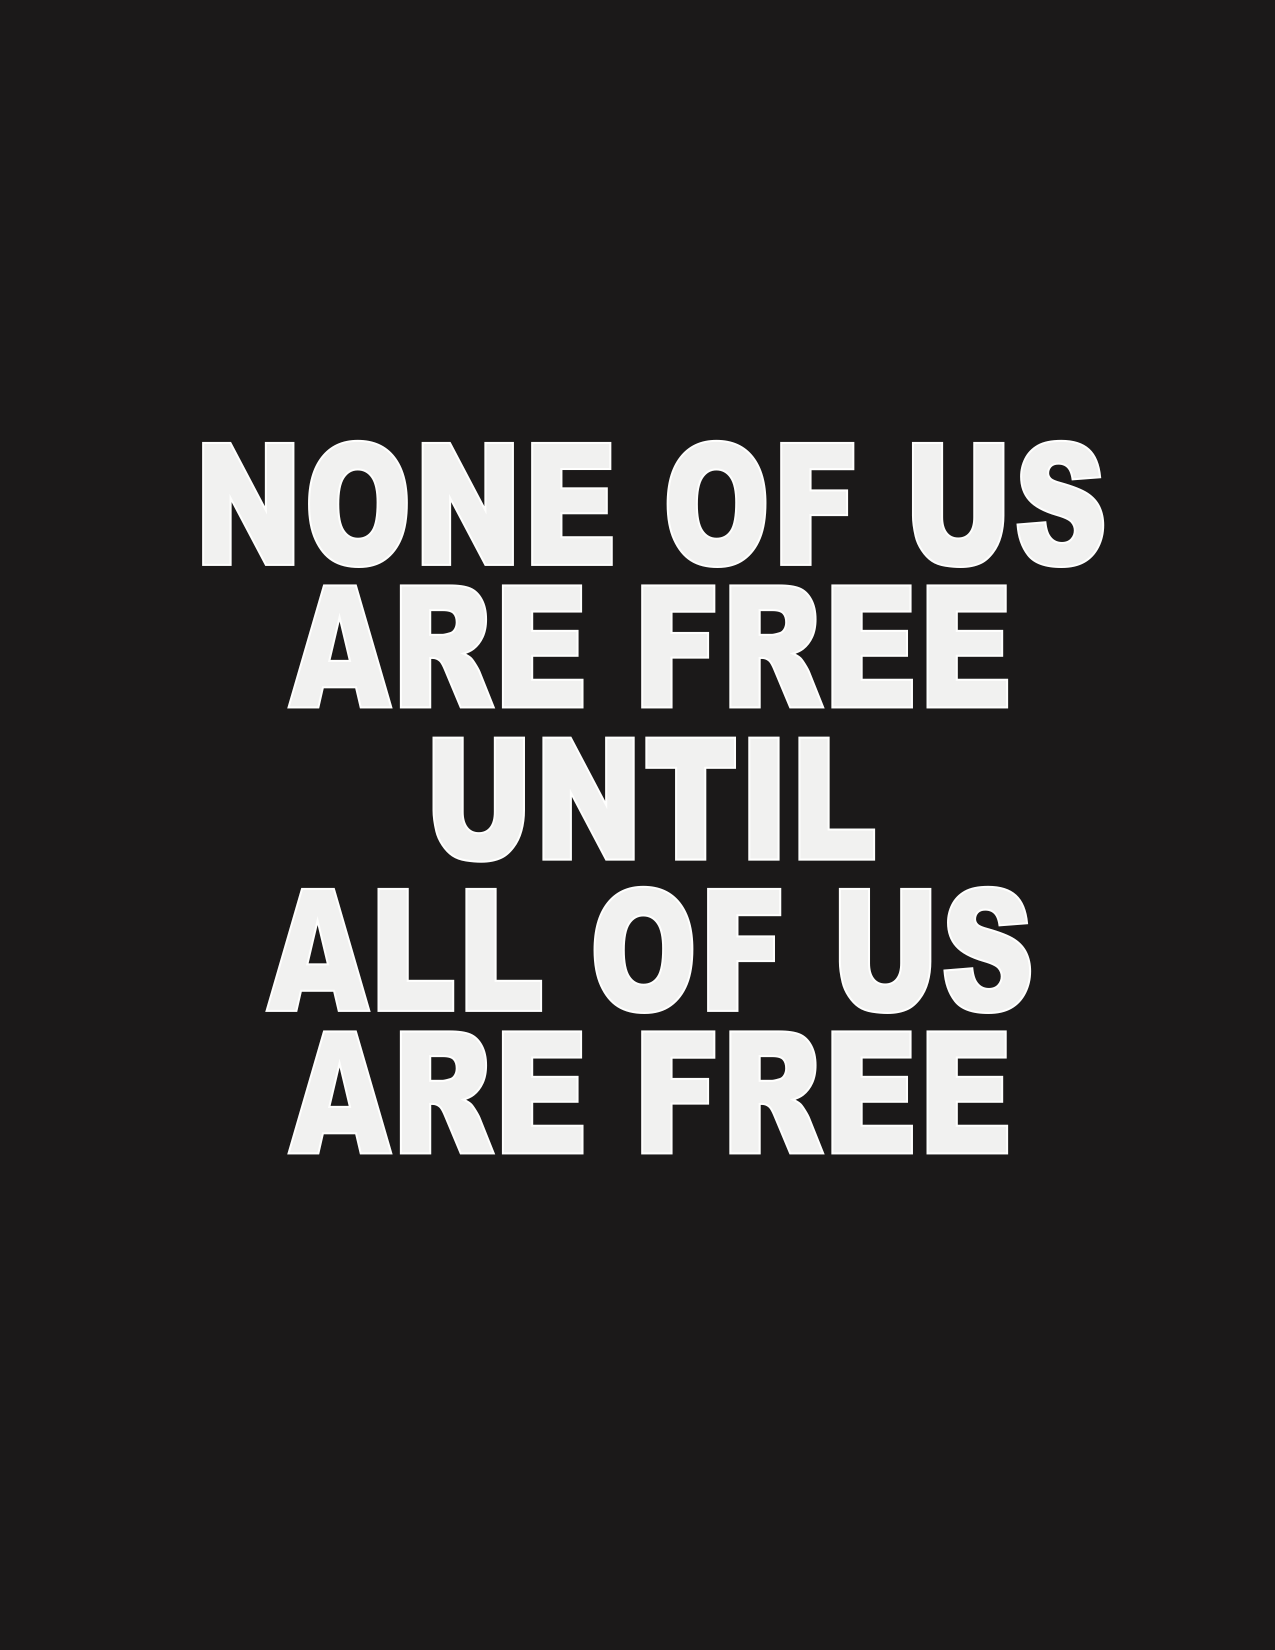 NONE OF US ARE FREE UNTIL ALL OF US ARE FREE